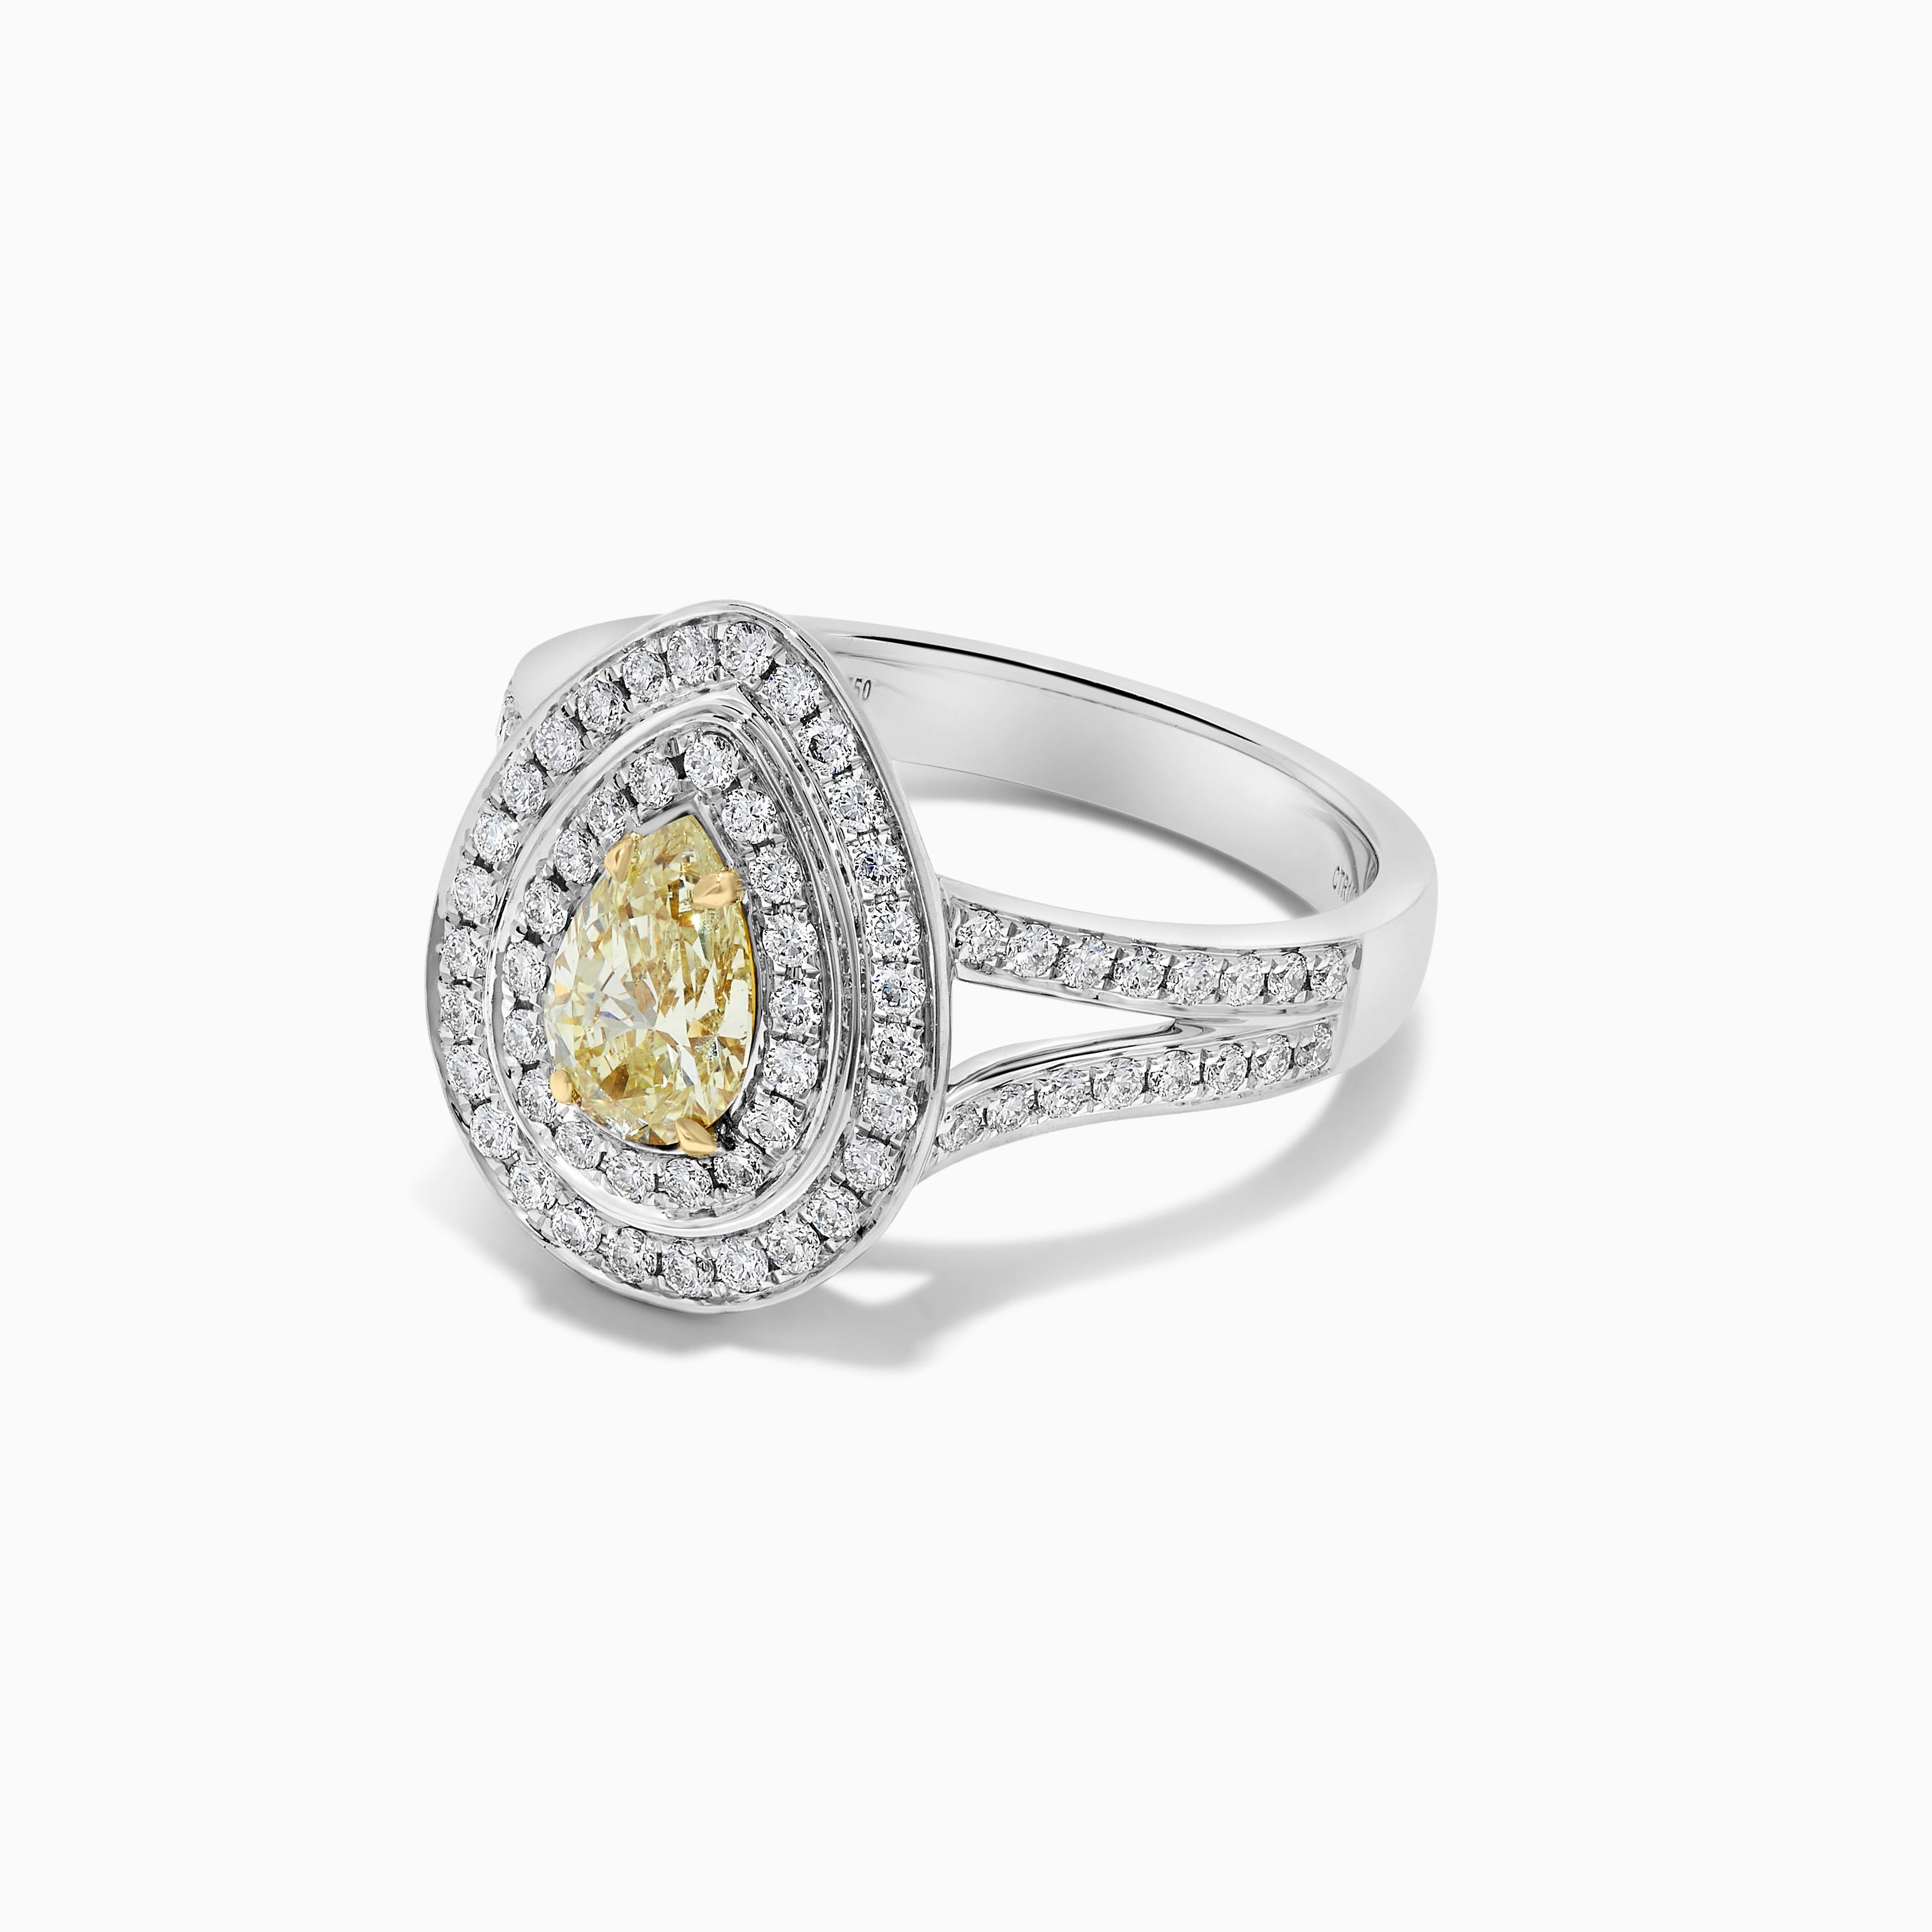 RareGemWorld's classic GIA certified diamond ring. Mounted in a beautiful 18K Yellow and White Gold setting with a natural pear cut yellow diamond. The yellow diamond is surrounded by small round natural white diamond melee. This ring is guaranteed